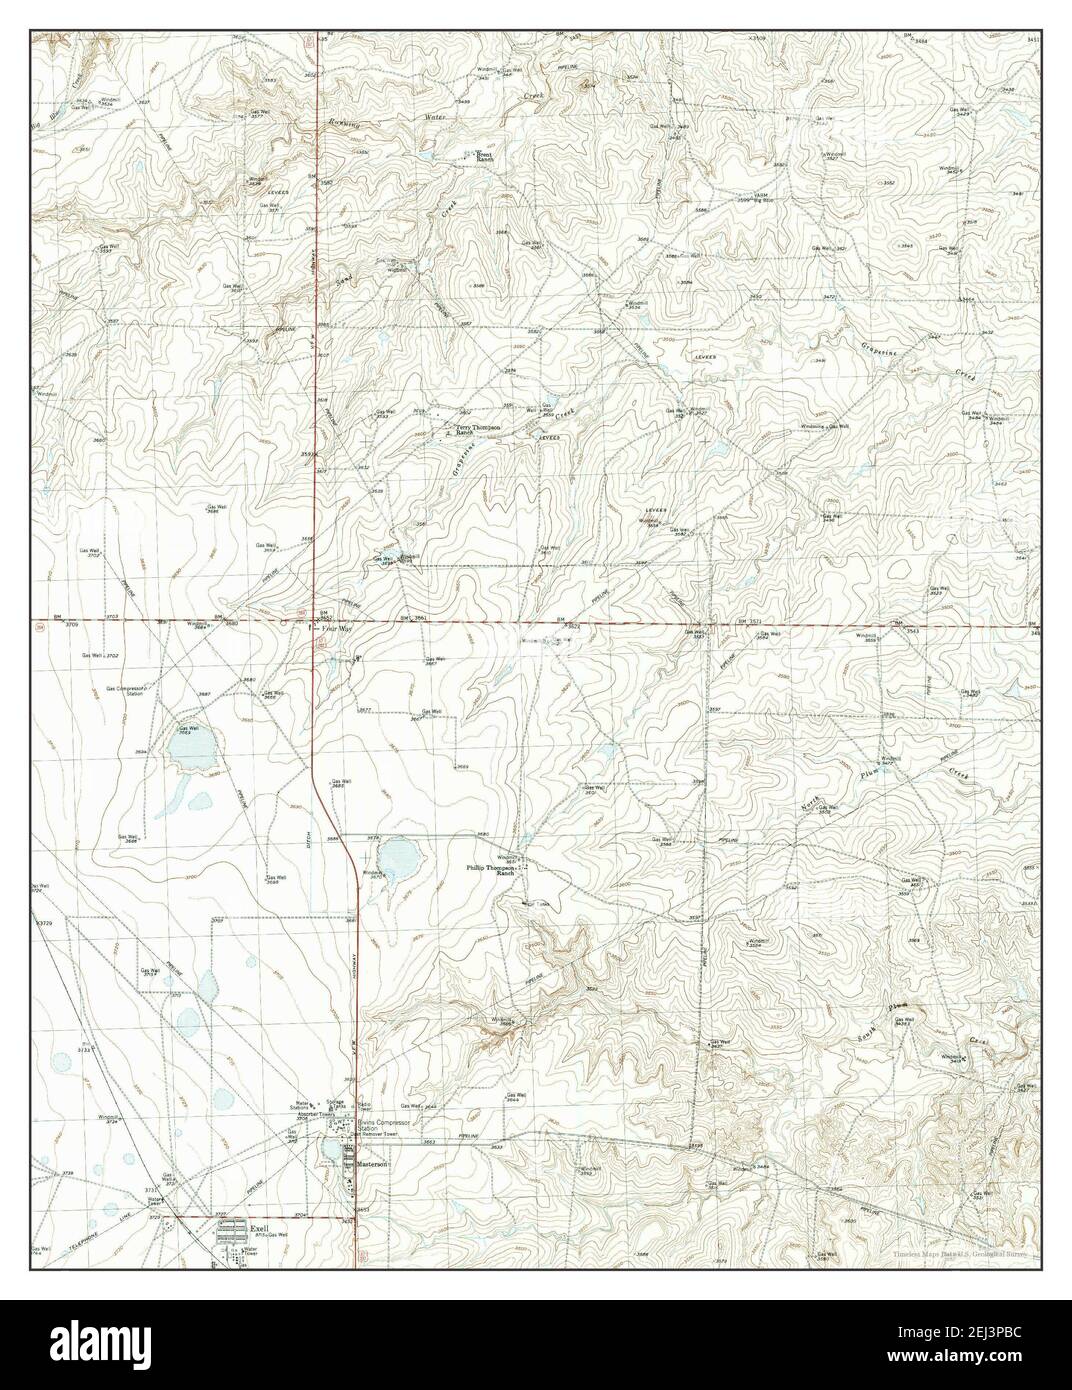 Masterson, Texas, map 1953, 1:24000, United States of America by Timeless Maps, data U.S. Geological Survey Stock Photo